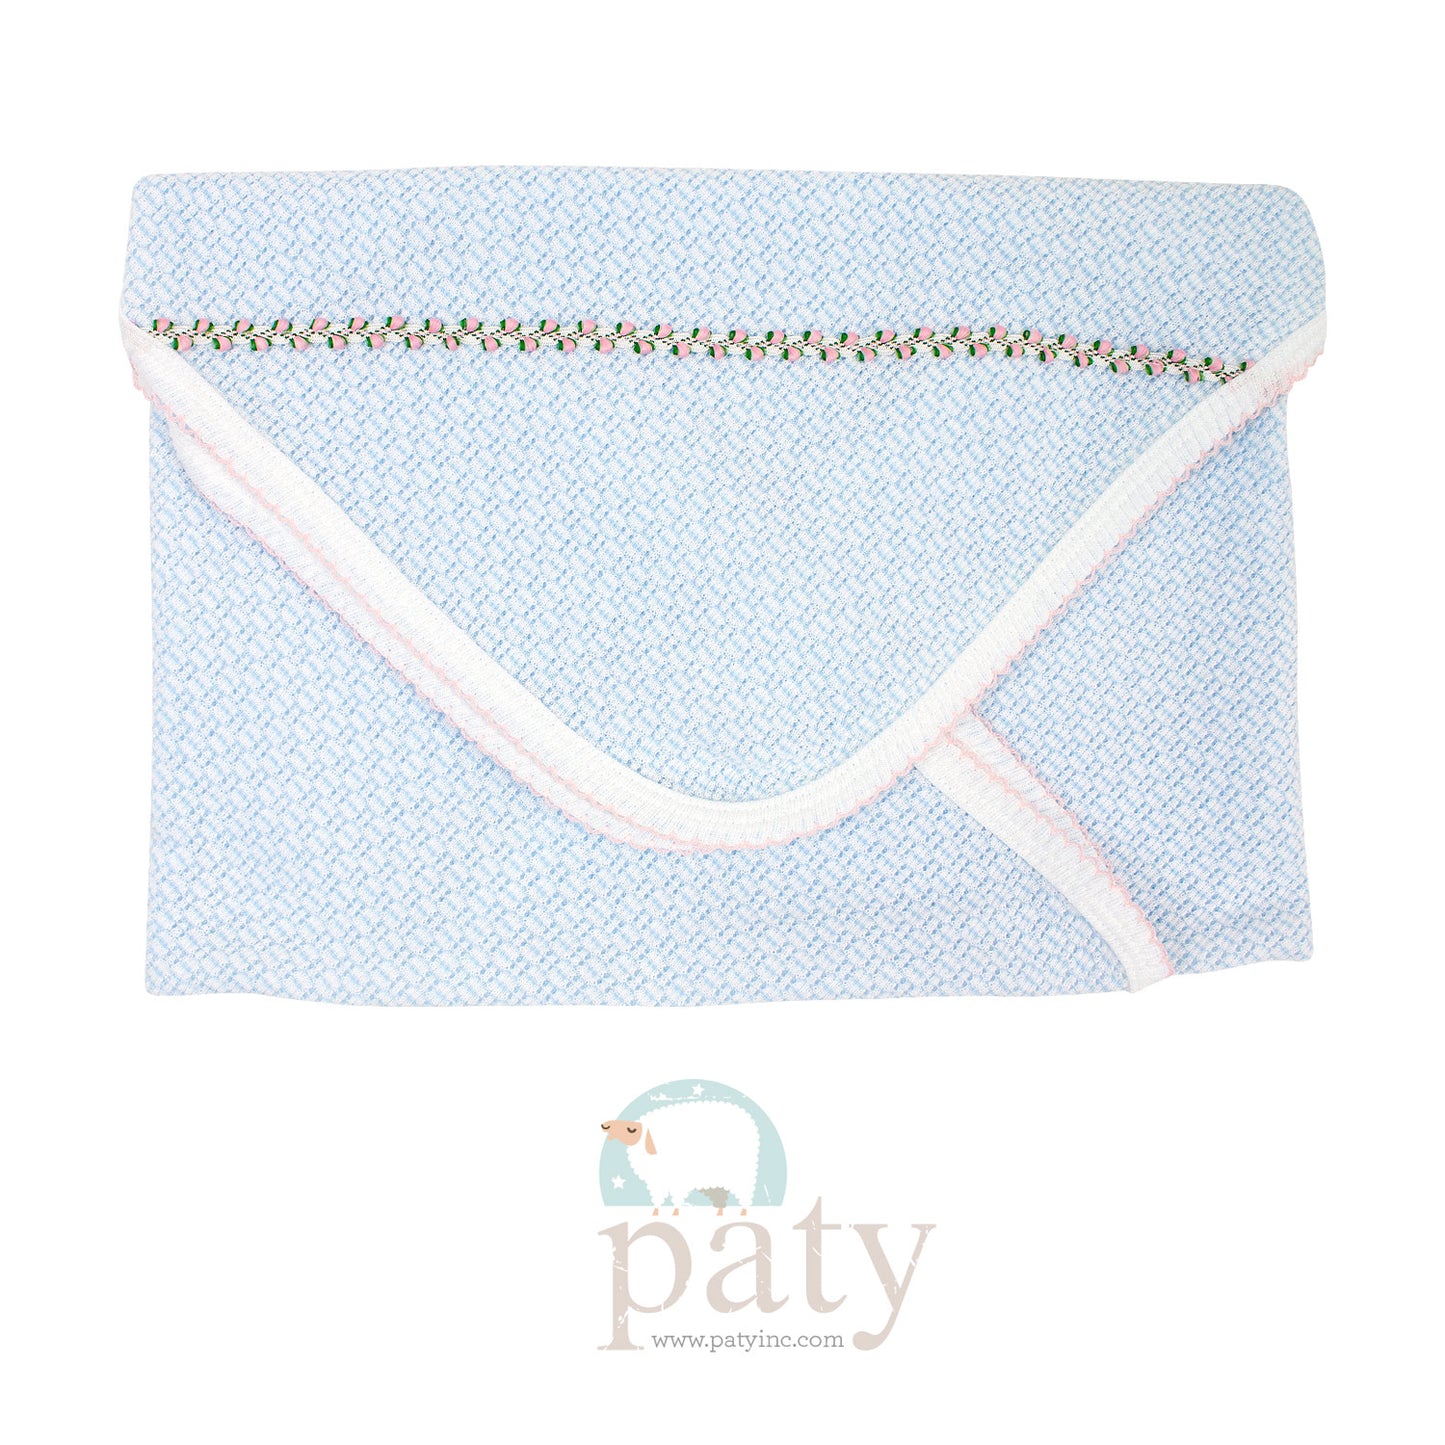 Blue Solid Color signature, 50/50 blend, paty knit accented in light pink rosebud trim.